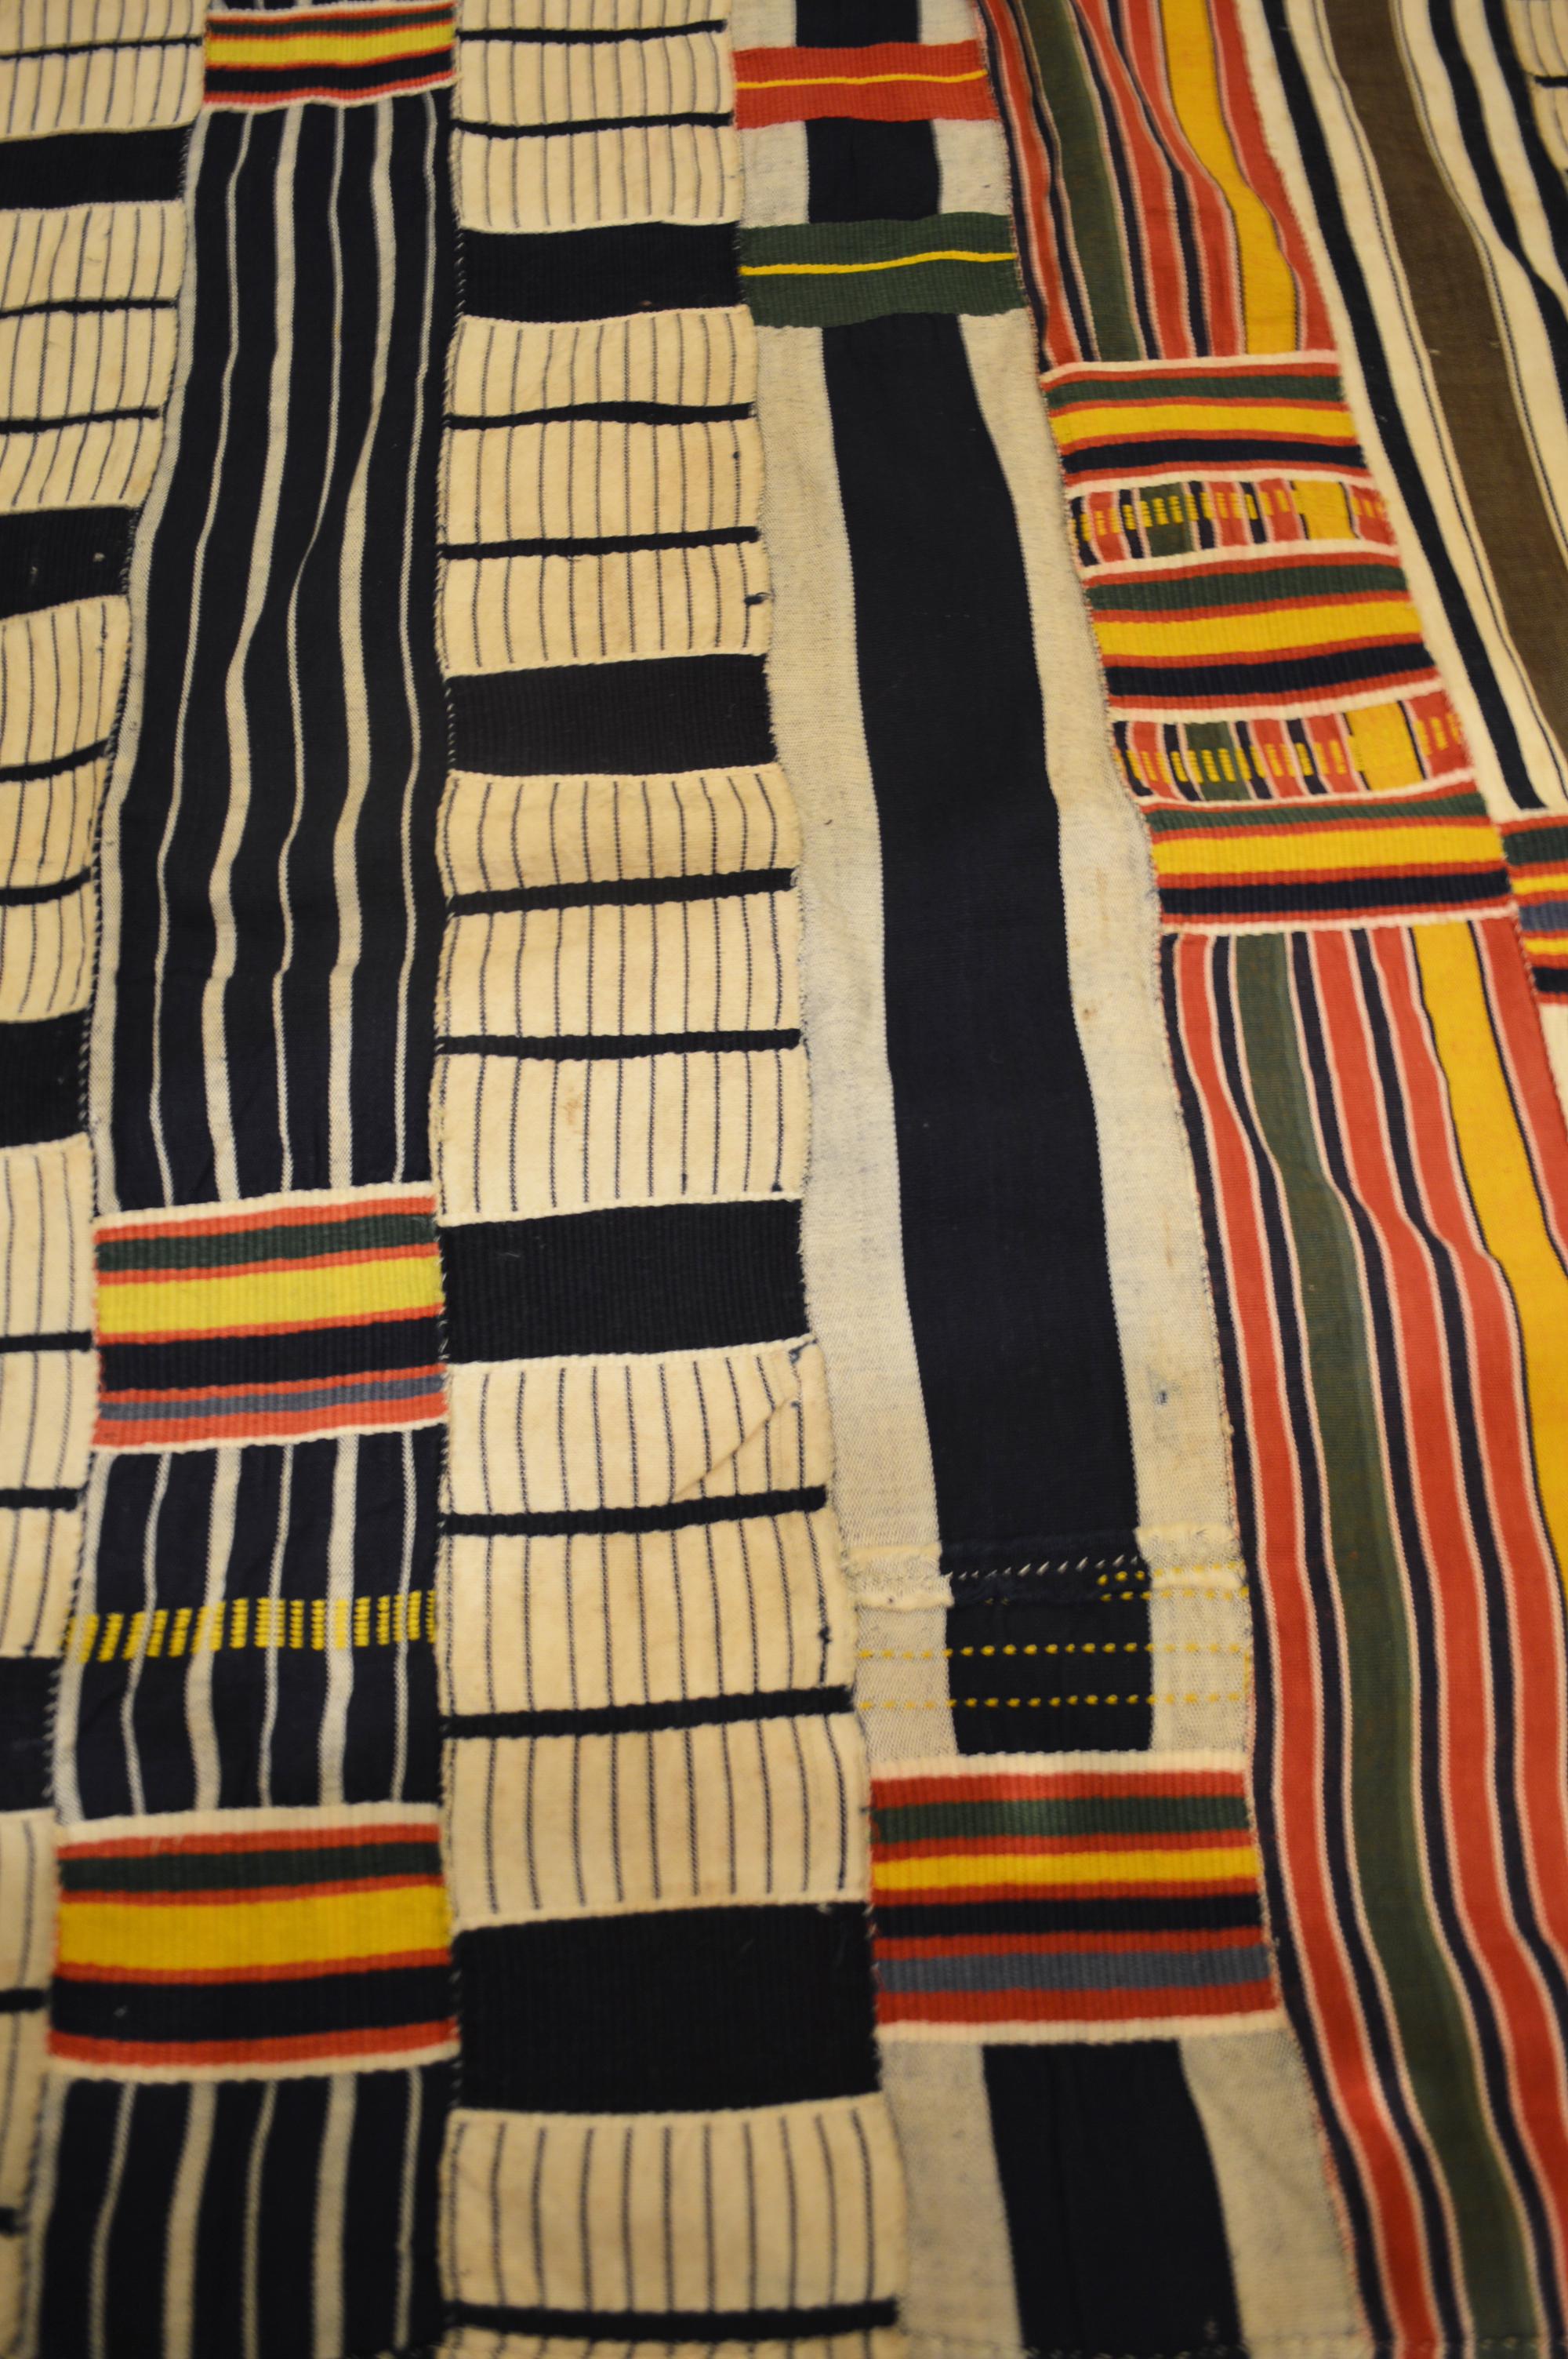 African Tribal Art Small Royal Ewe Kente Cloth Interior Design In Good Condition For Sale In London, GB